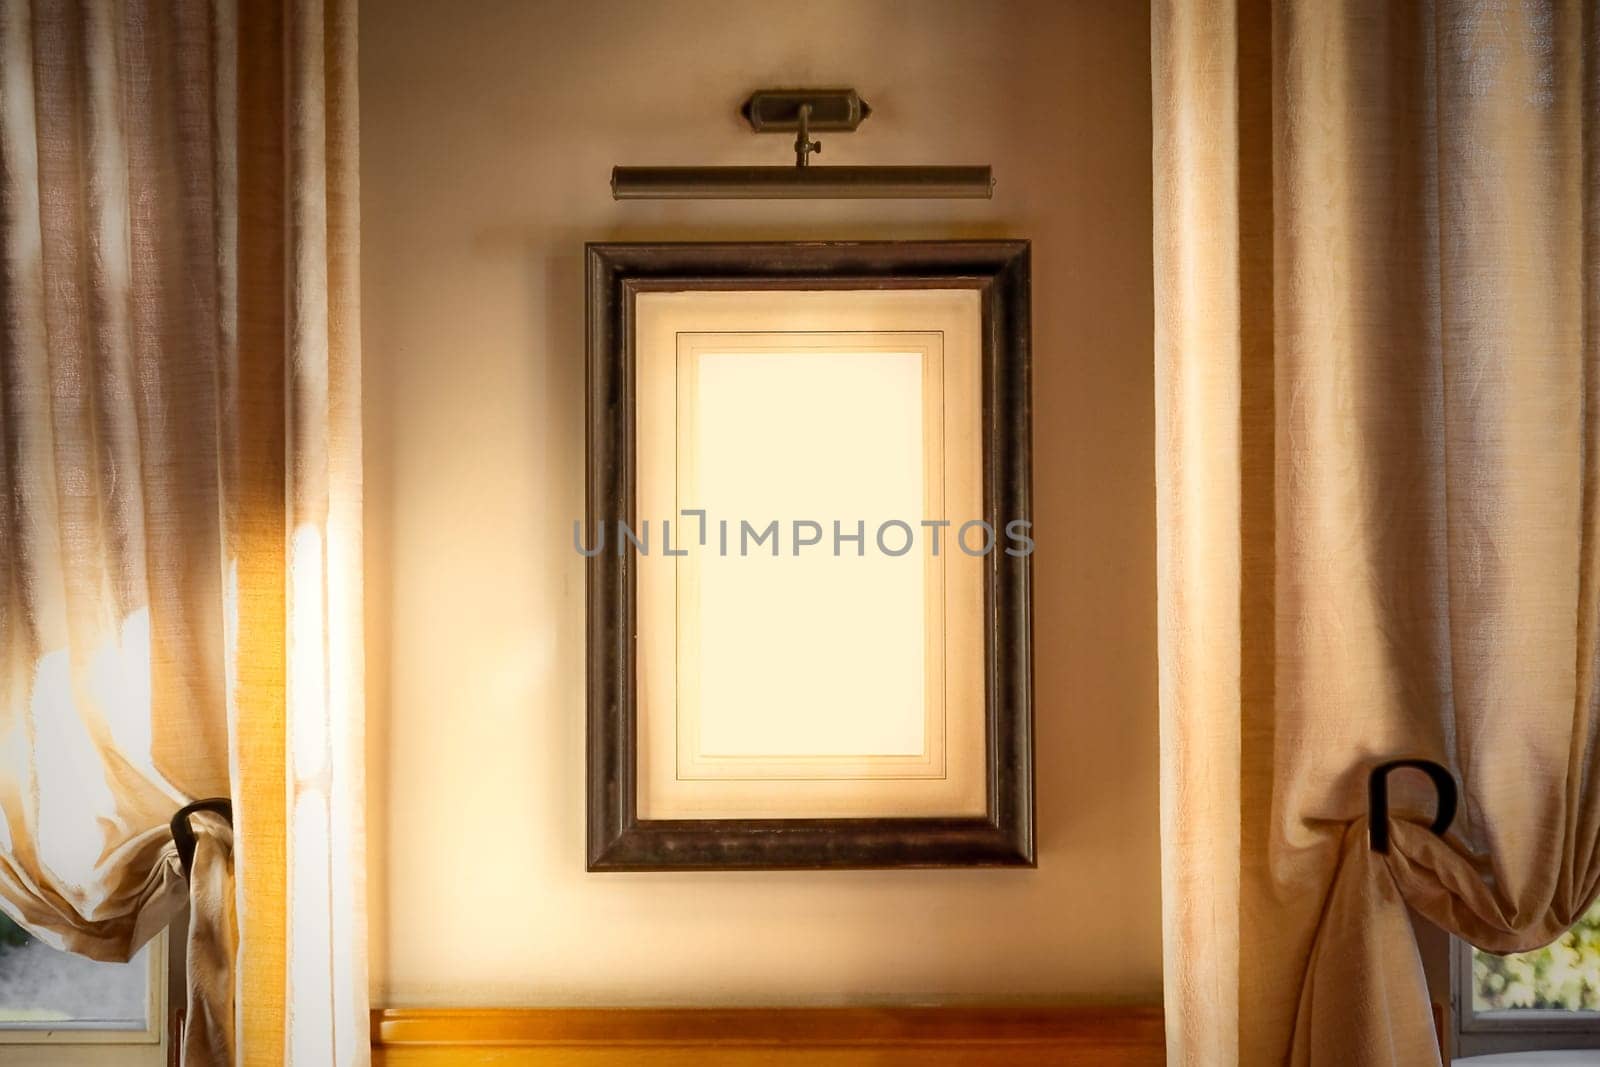 Mockup with a frame with a mat for a painting or photograph in the wall between the windows in a classic interior by Rom4ek